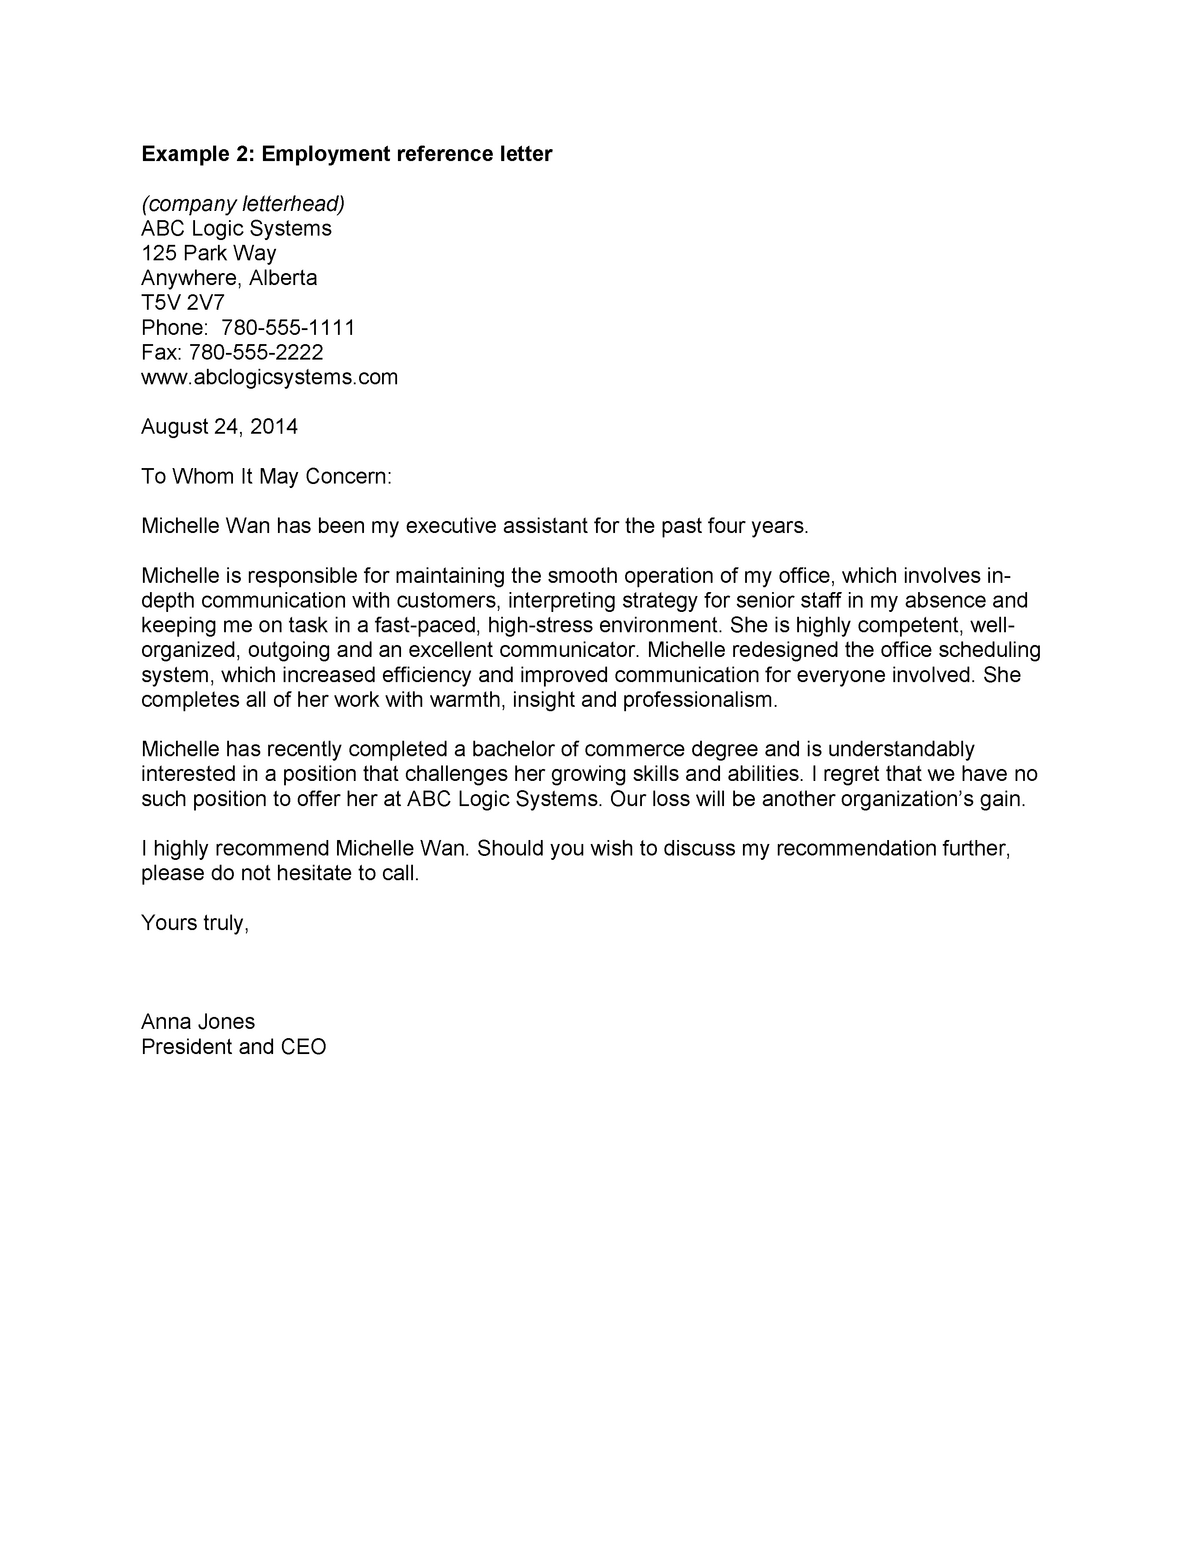 Professional Letter Of Reference Of Employment Example 2 Employment Reference Letter Company 5736